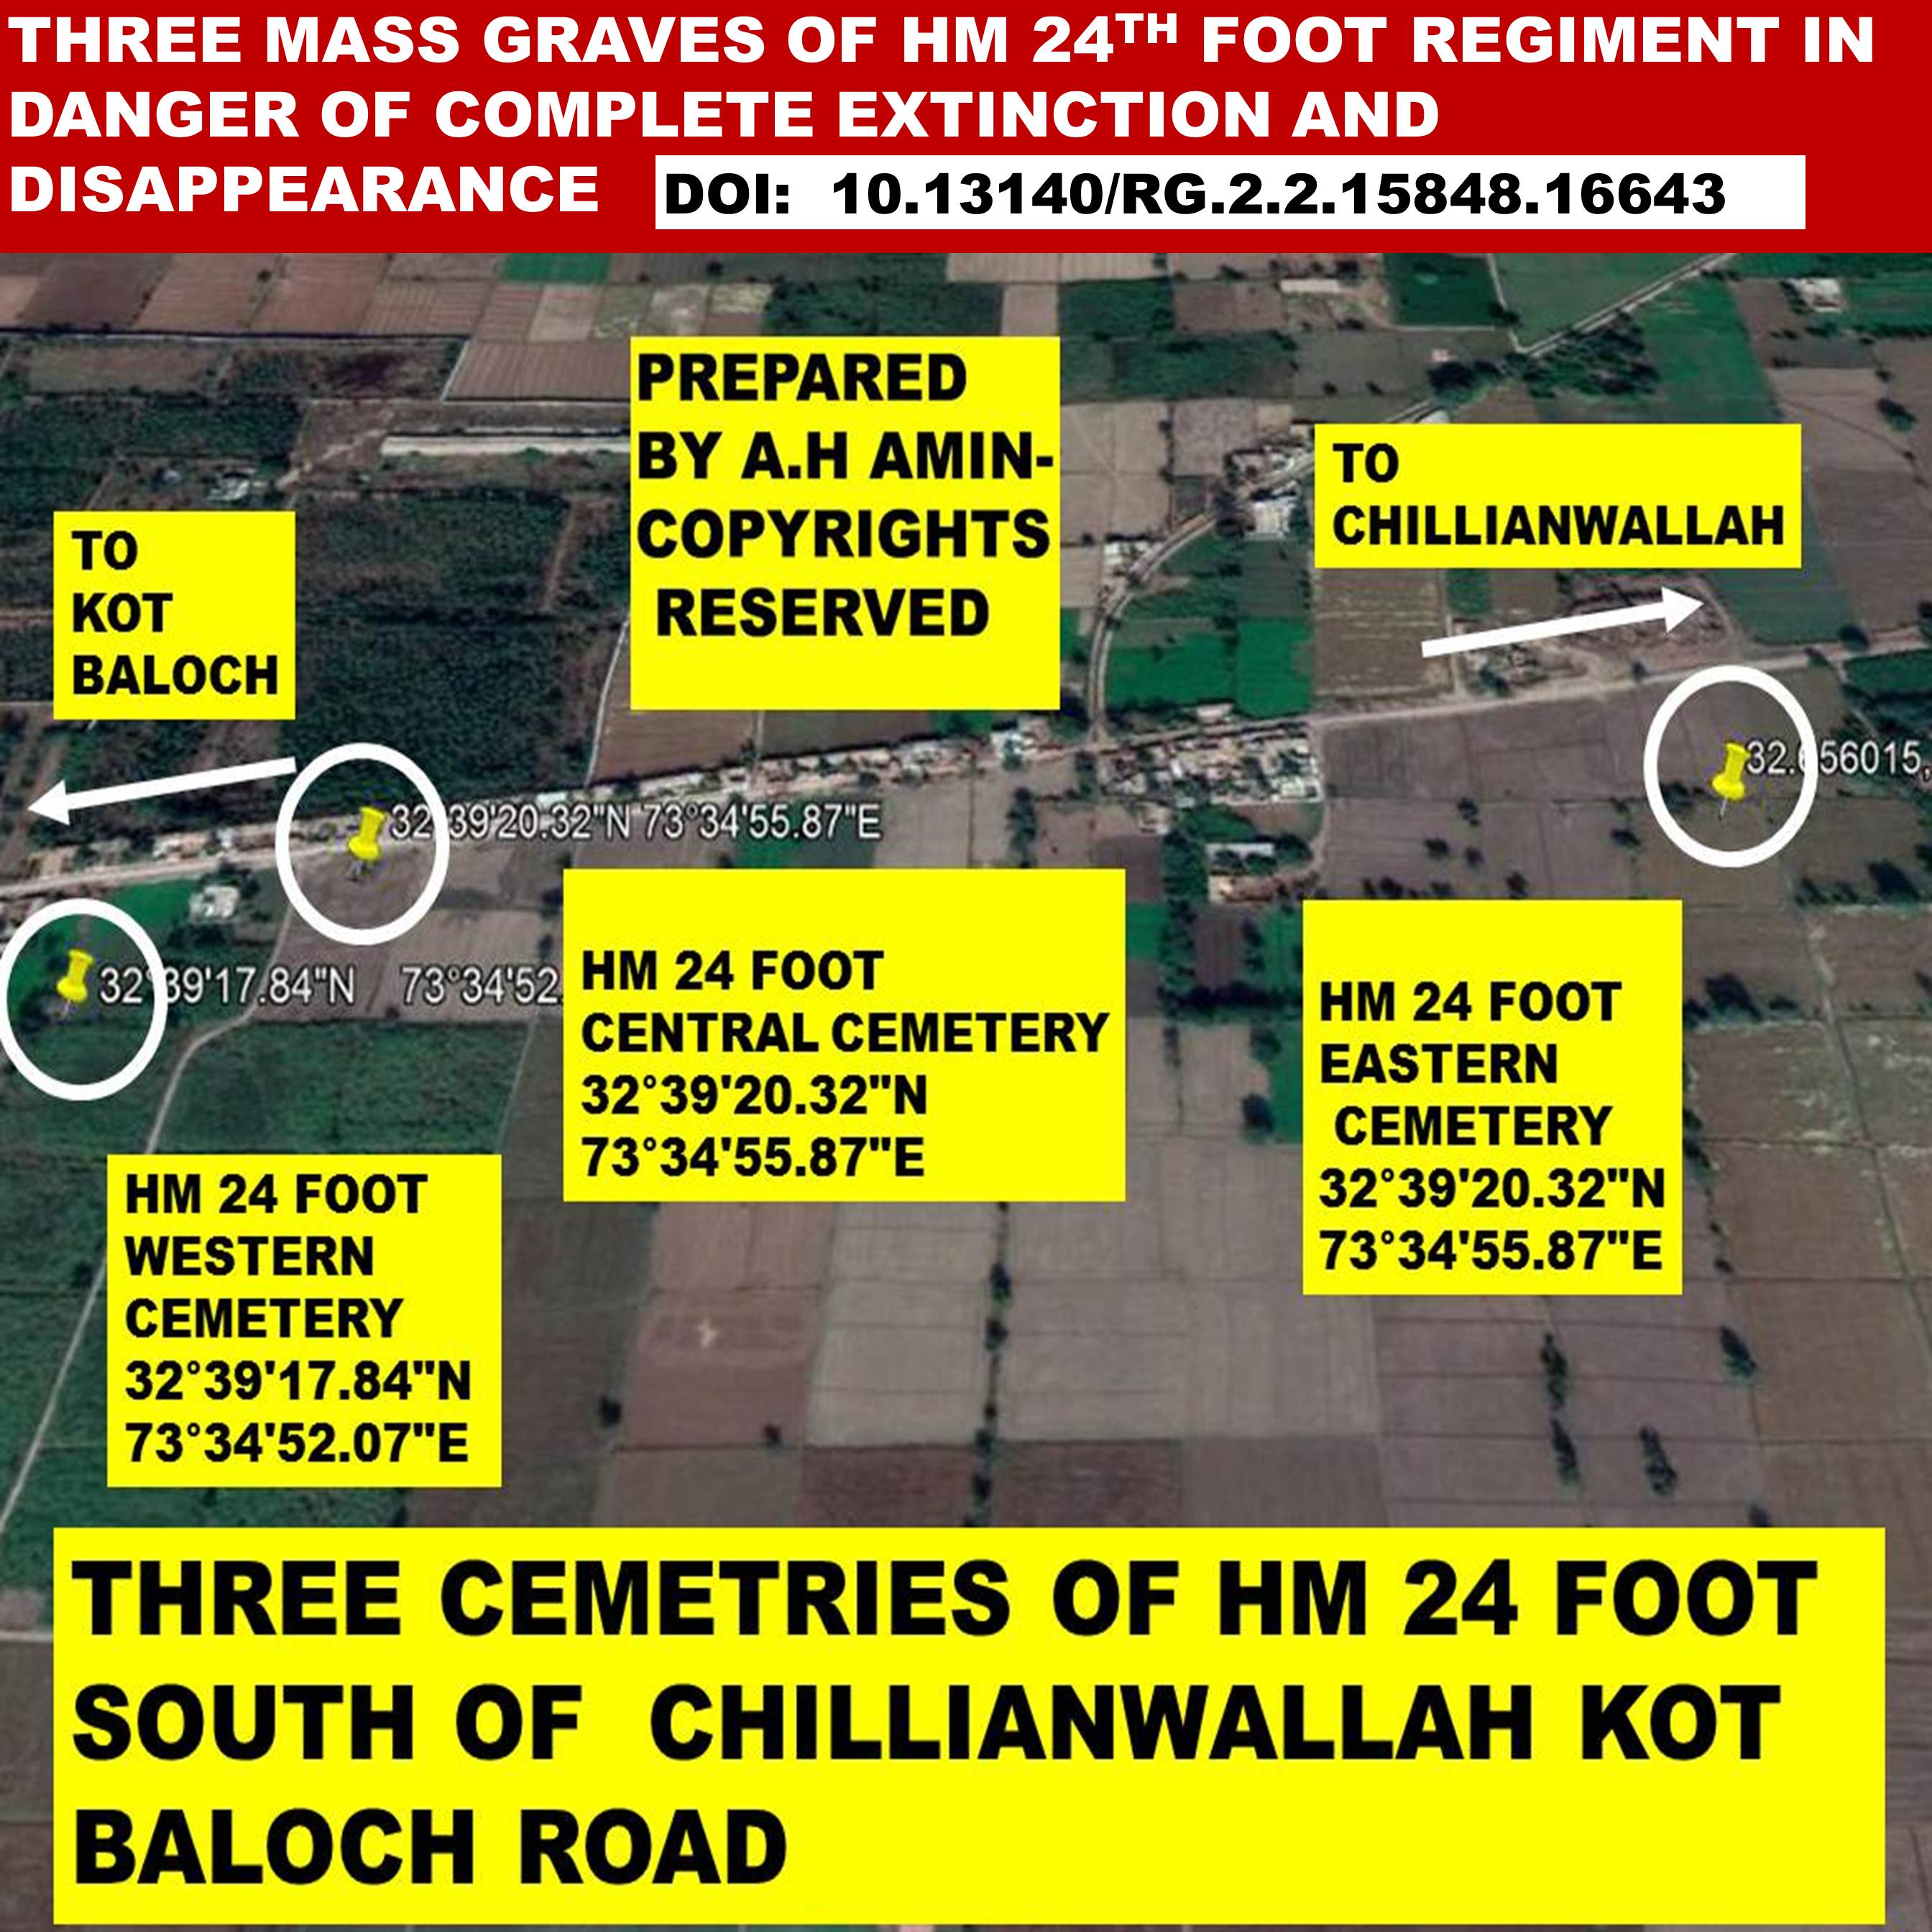 THREE MASS GRAVES OF HM 24TH FOOT REGIMENT IN DANGER OF COMPLETE EXTINCTION AND DISAPPEARANCE